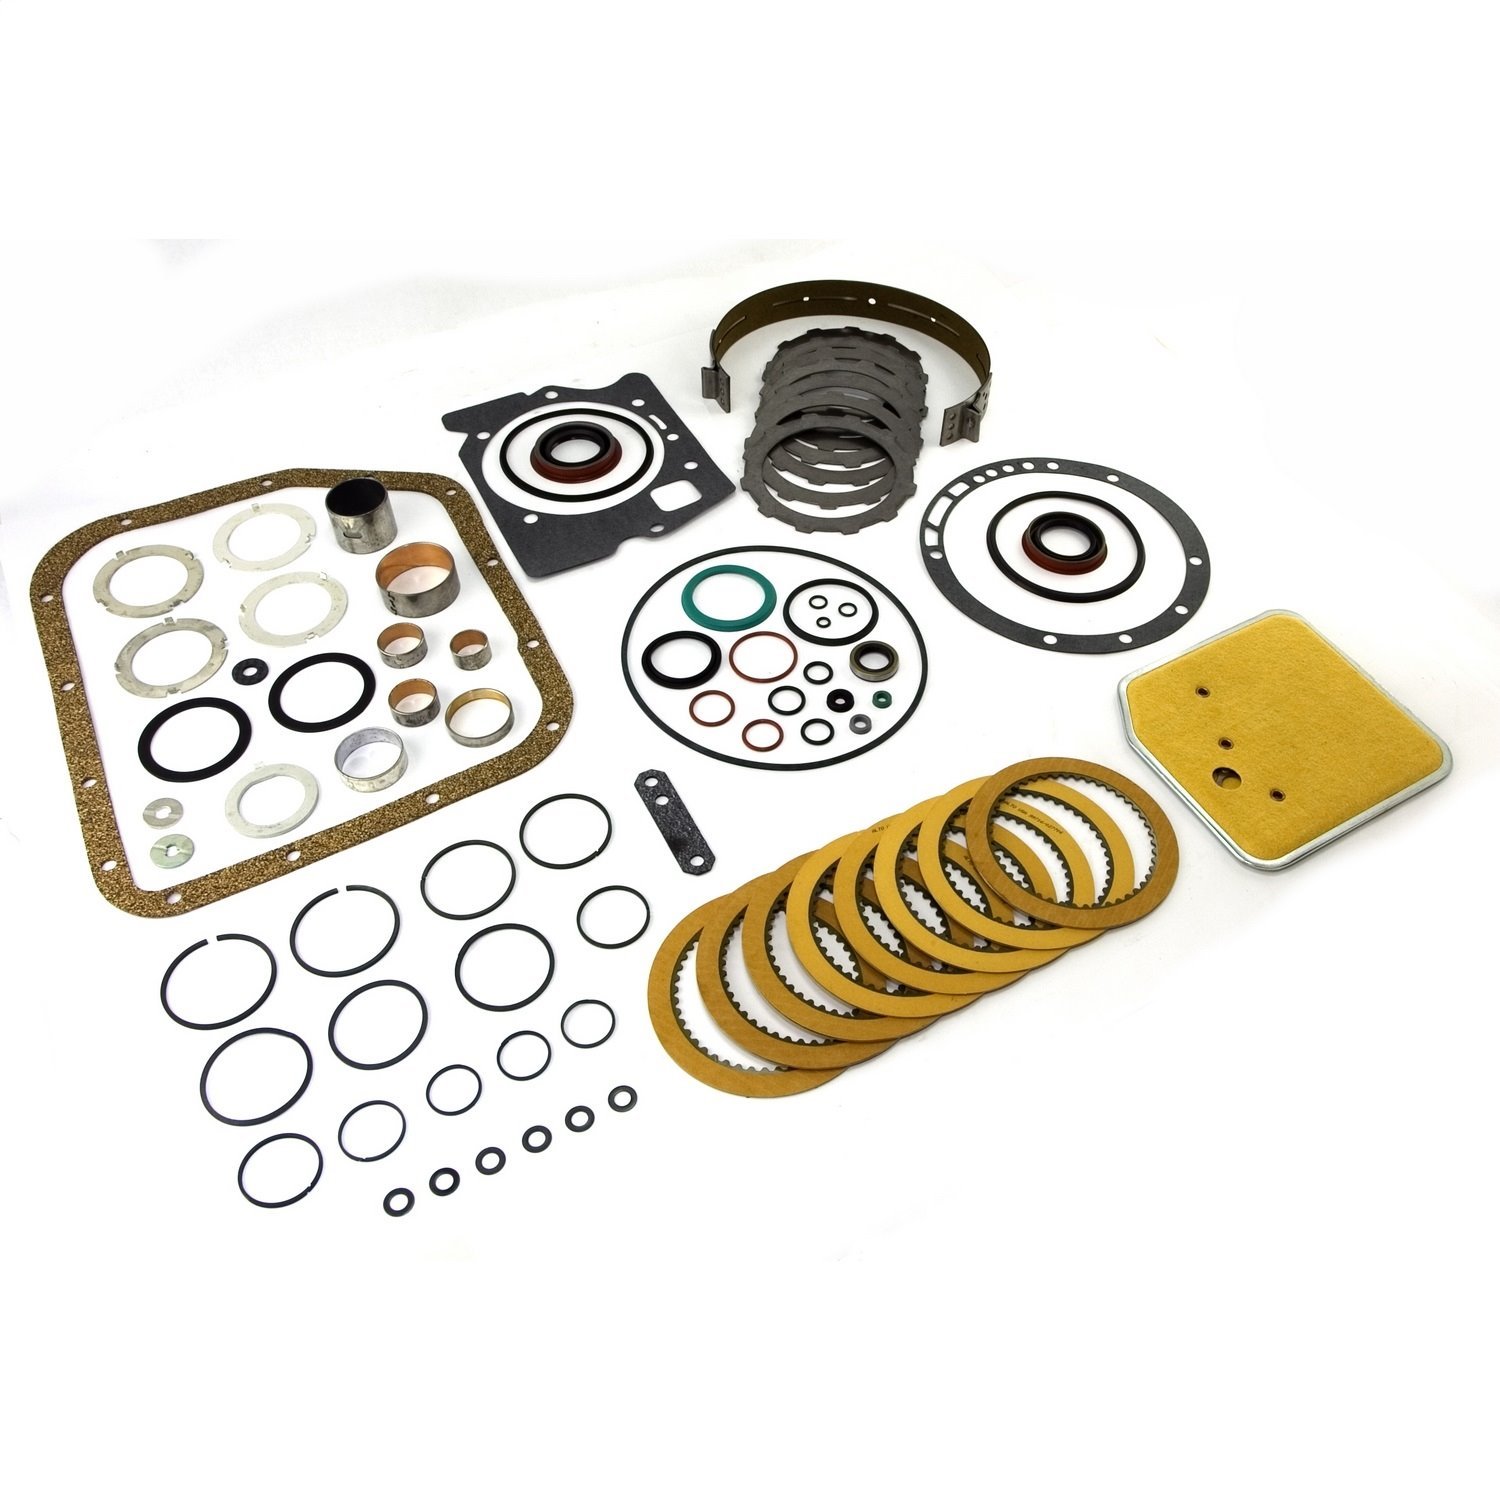 This automatic transmission rebuild kit from Omix-ADA fits 87-95 Jeep Wrangler YJ and 97-03 Jeep Wra